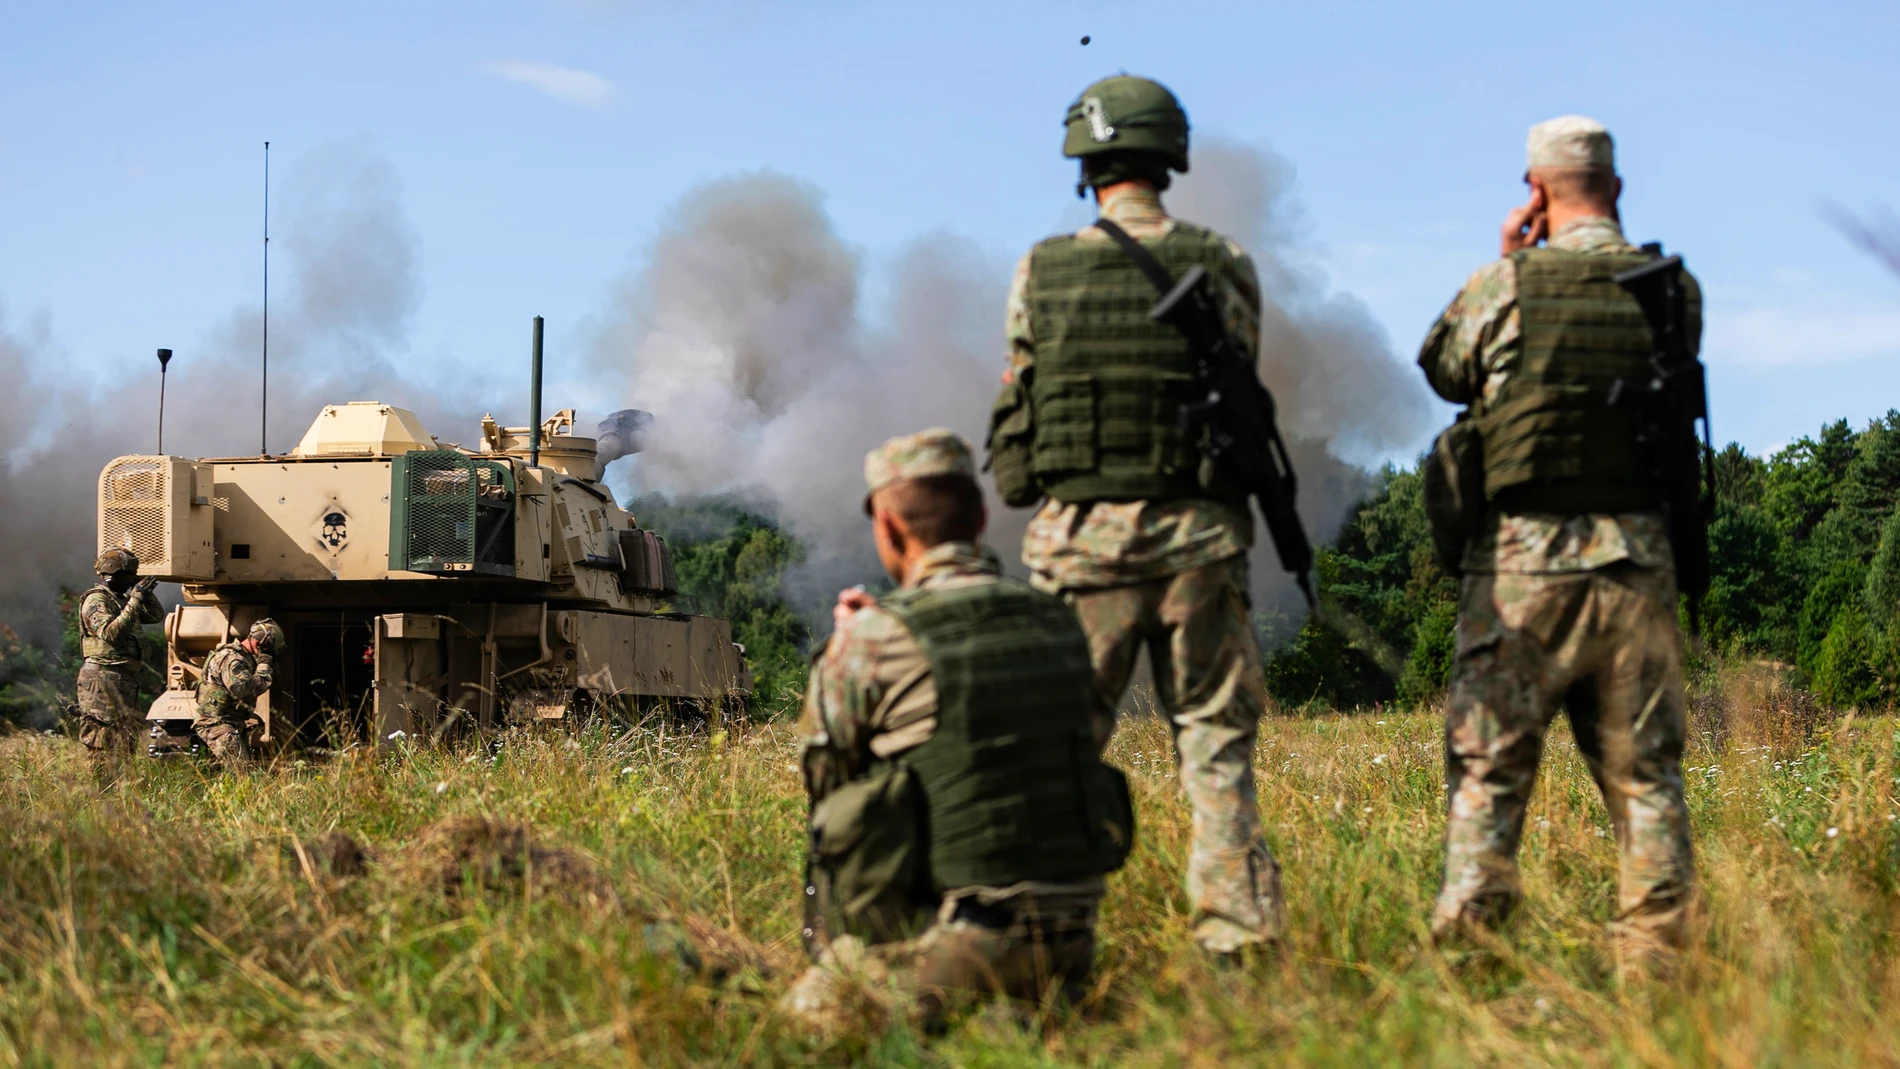 July 27, 2023 - Klaipeda, Estonia - Lithuanian Land Forces soldiers observe An M109A6 Paladin self-propelled howitzer operated by Charlie Battery, 3rd Battalion, 16th Field Artillery Regiment, supporting 4th Infantry Division, during the Baltic Thunder live-fire exercise near Klaipeda, Lithuania, July 27. The multi-national exercise provided NATO allies from Lithuania and Slovakia an opportunity to conduct fire missions, and share best practices. The 4th Inf. Div.'s mission in Europe is to en...